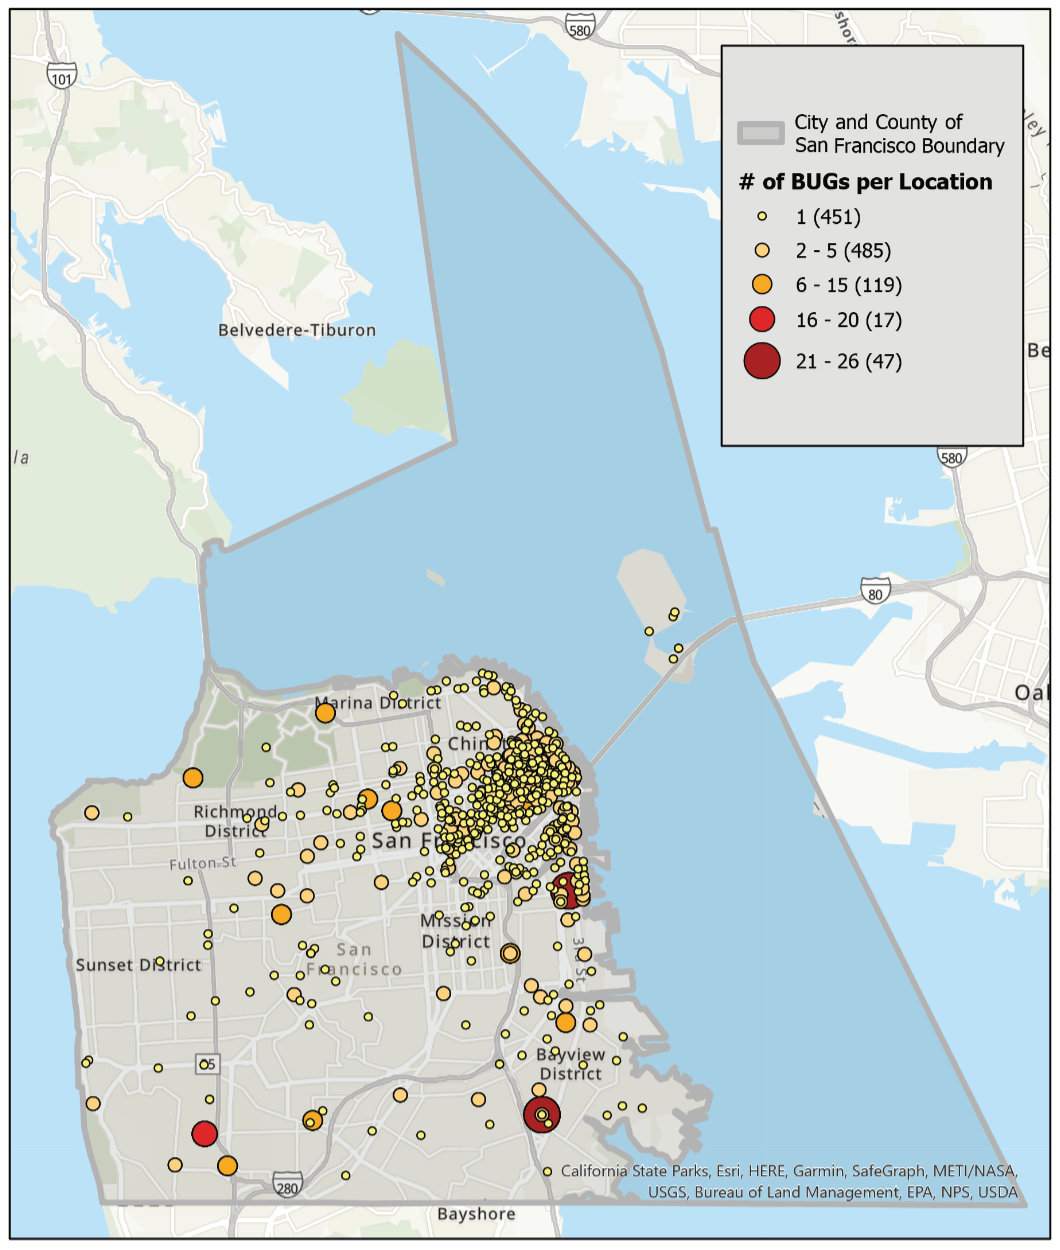 Map image: Backup generator population in San Francisco grows to 1,208, mostly diesel. 84 additional BUGs are located at the San Francisco International Airport and other unincorporated areas adjacent to city boundaries. Five BUGs were not mapped due to incomplete data. SOURCE: Bay Area Air Quality Management District; M.Cubed, 2022